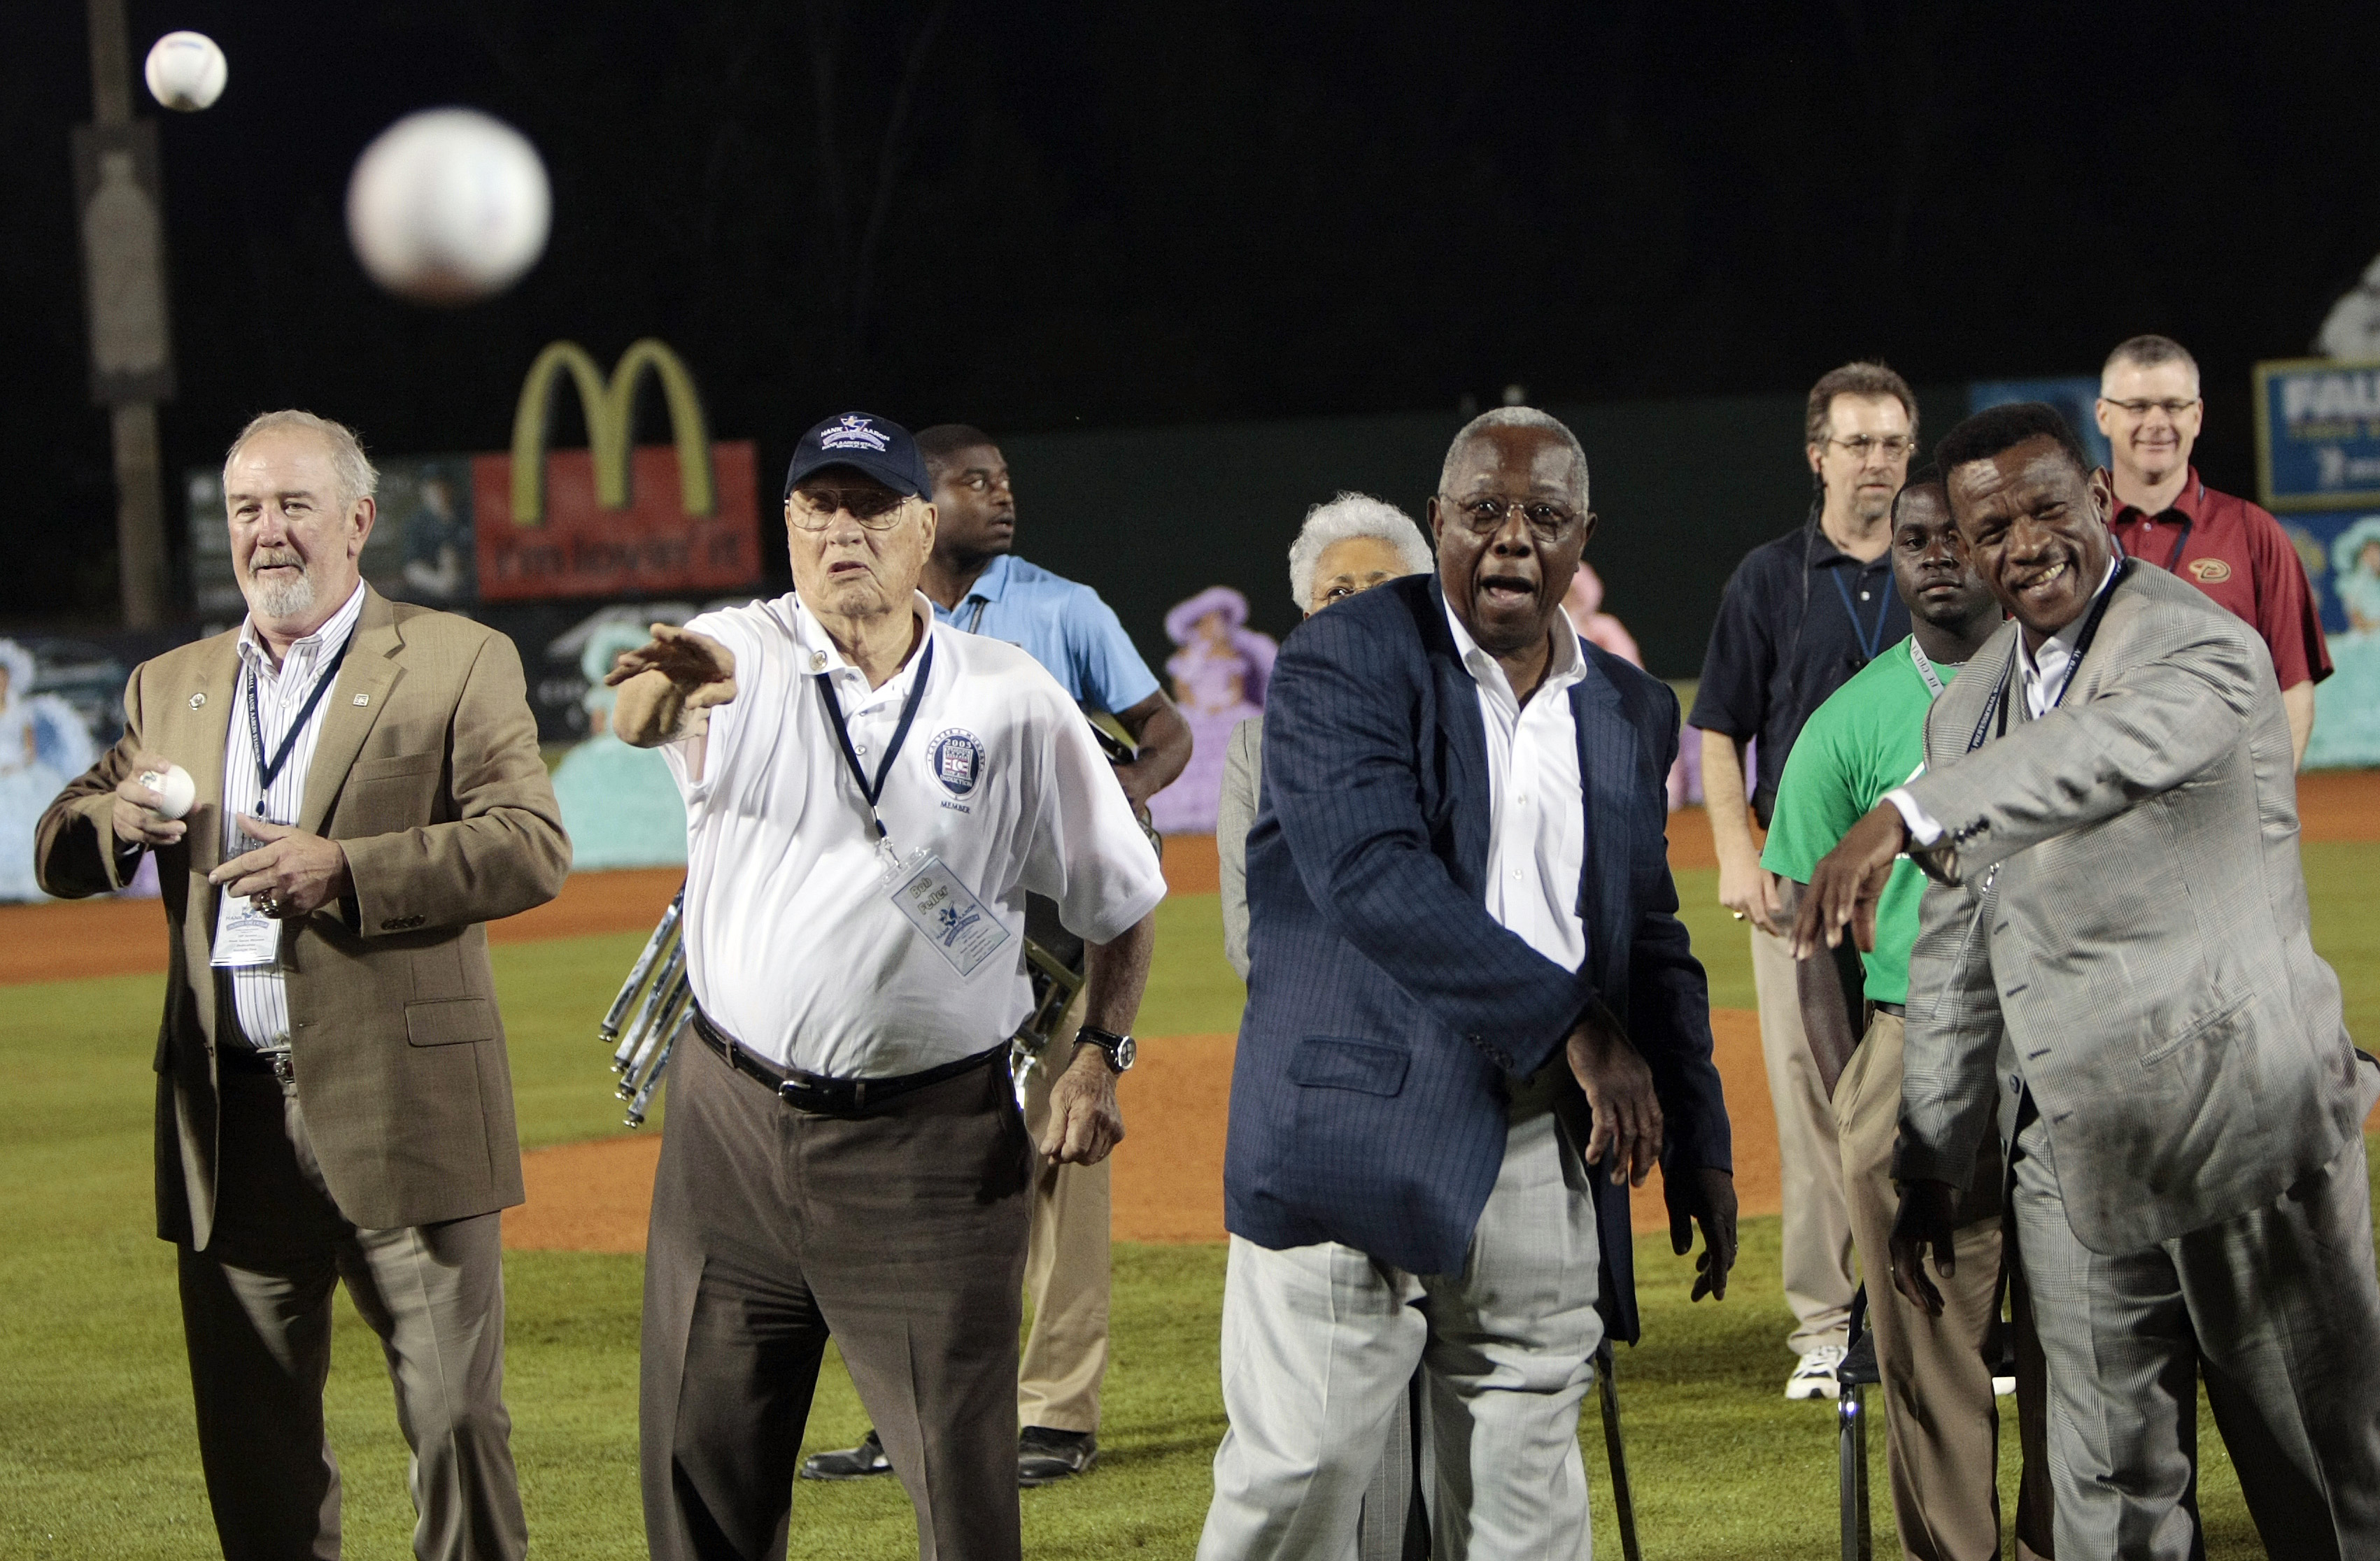 MOBILE, AL - APRIL 14:  Baseball Hall of Famers (L-R) Bruce Sutter, Bob Feller, Hank Aaron and Rickey Henderson throw out the first pitch during pre-game ceremonies following the opening the Hank Aaron Museum at the Hank Aaron Stadium on April 14, 2010 in